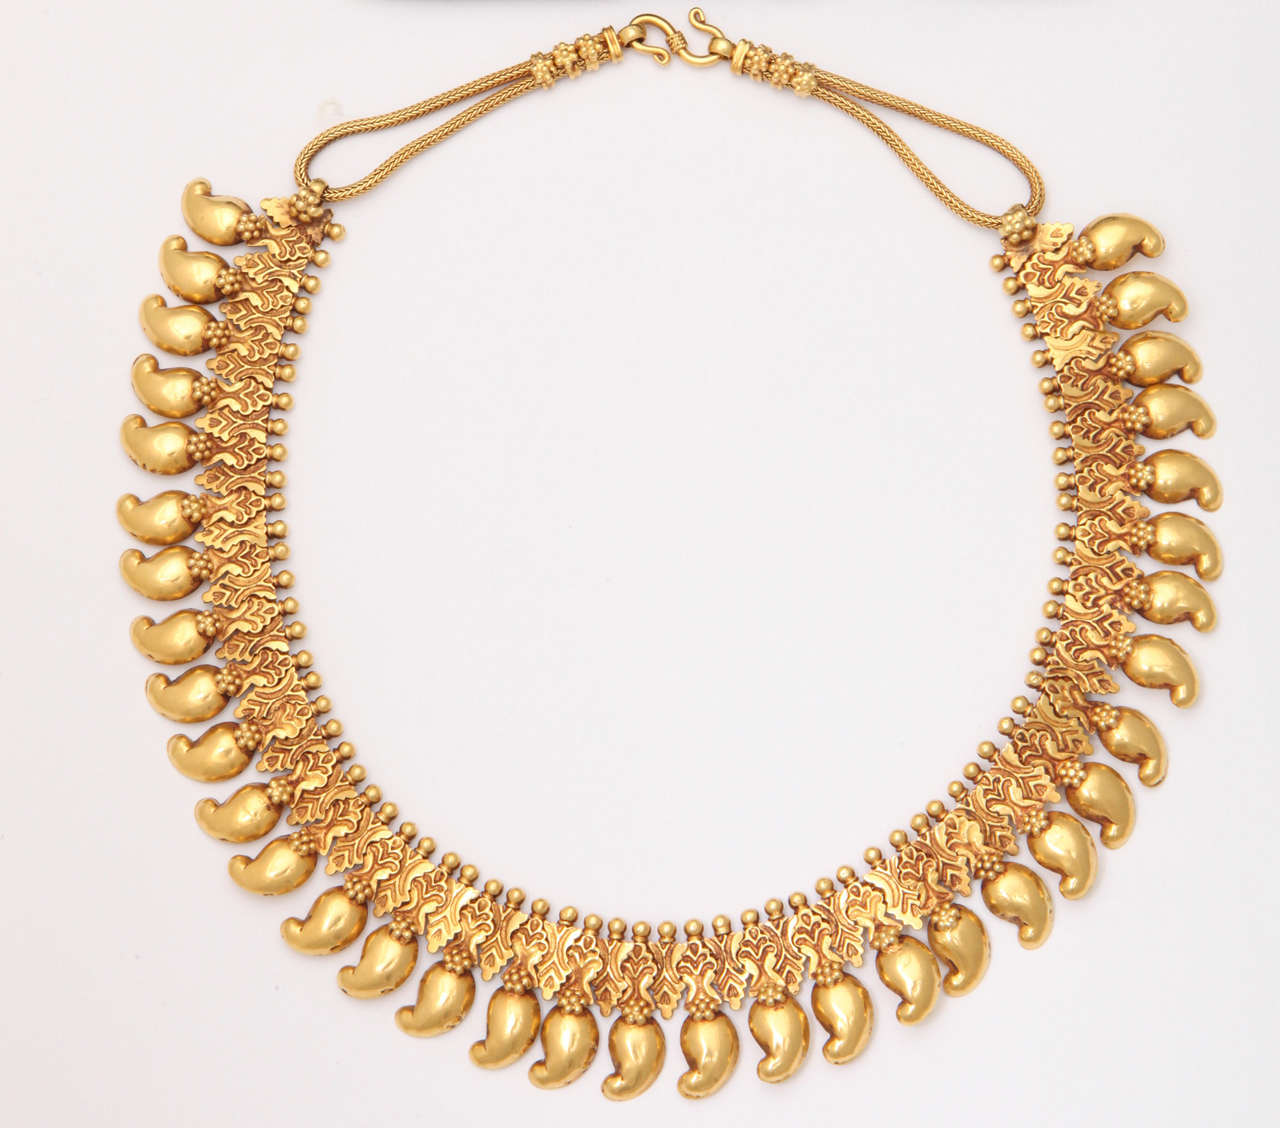 22kt Indian Necklace on woven wire closing.  Usually given as dowry gifts & worn by Brides. Rare and usually never parted with by families.  Paisley pendant motifs  making a rich & sumptuous collar further embellished by a rich gold collar.